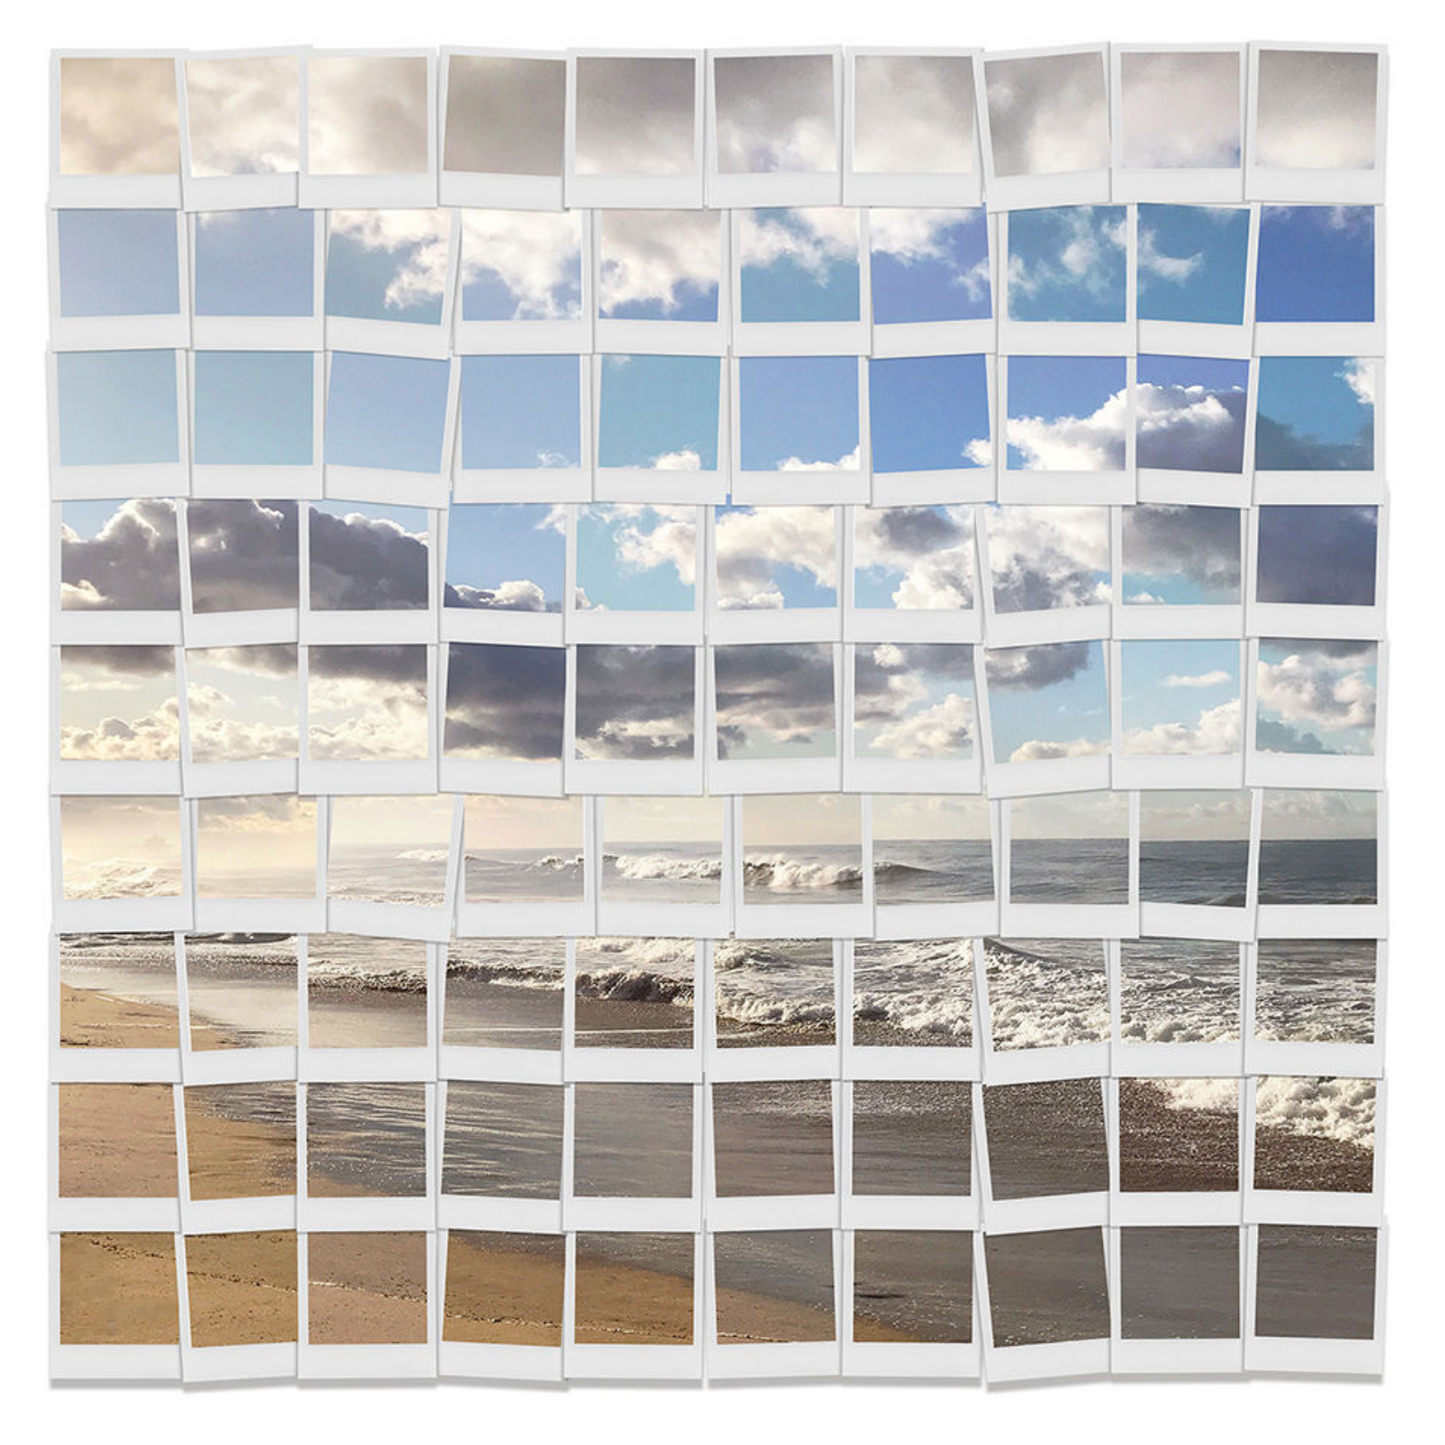 Ocean scape created with a polaroid design on canvas with matte white gallery float frame. This ocean view features a blue sky with clouds with a sandy beach